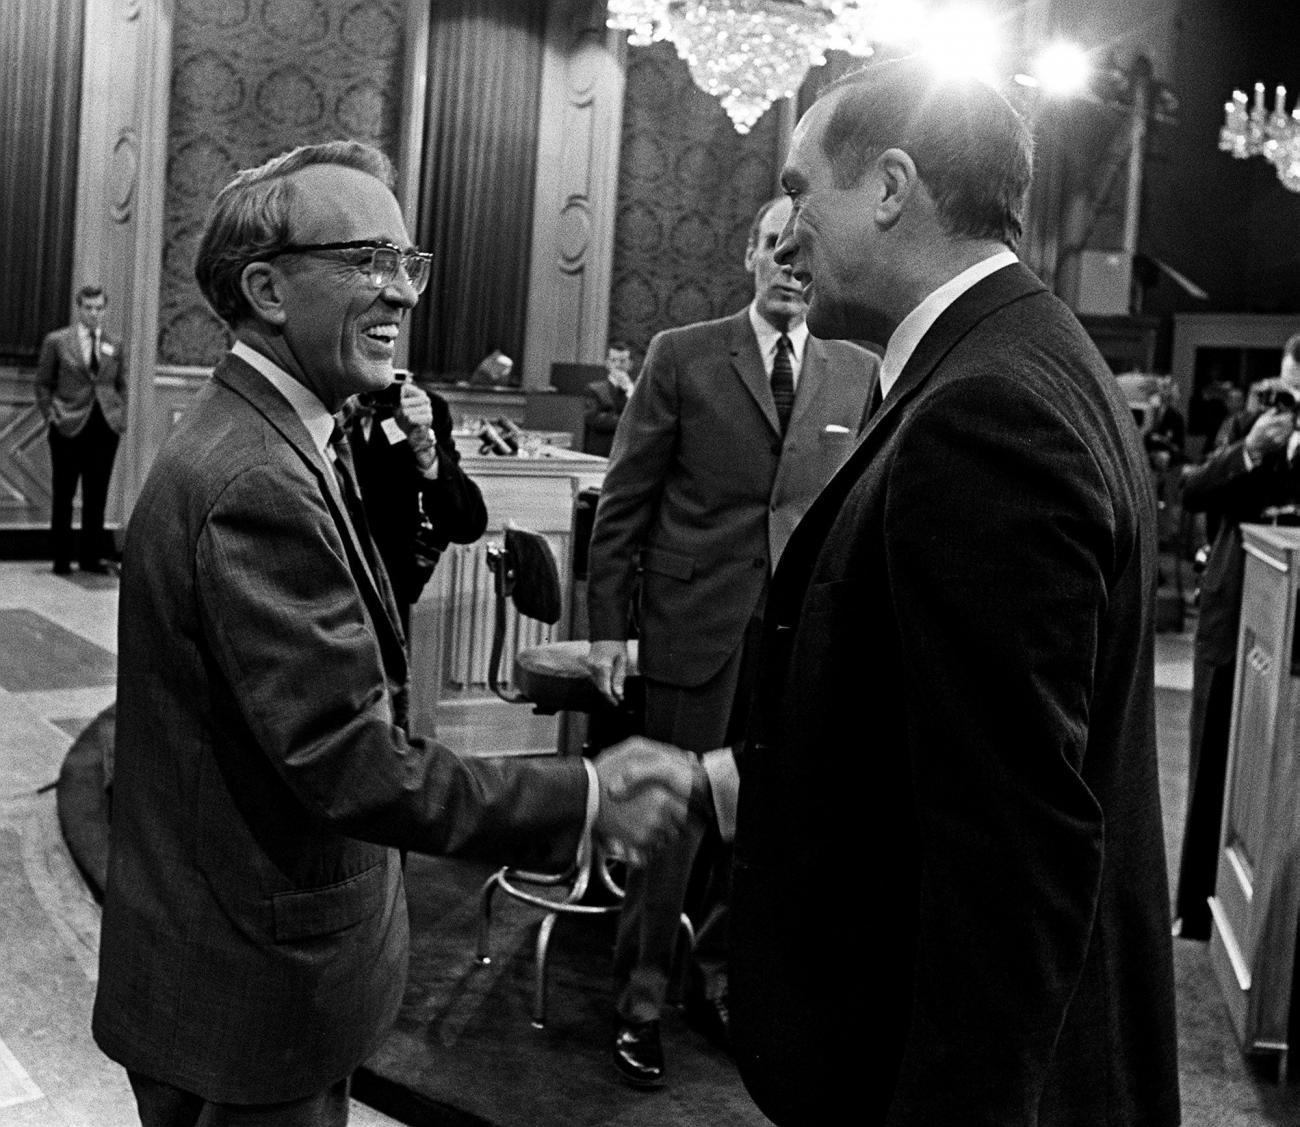 Tommy Douglas and a man both wearing suits are shaking hands.